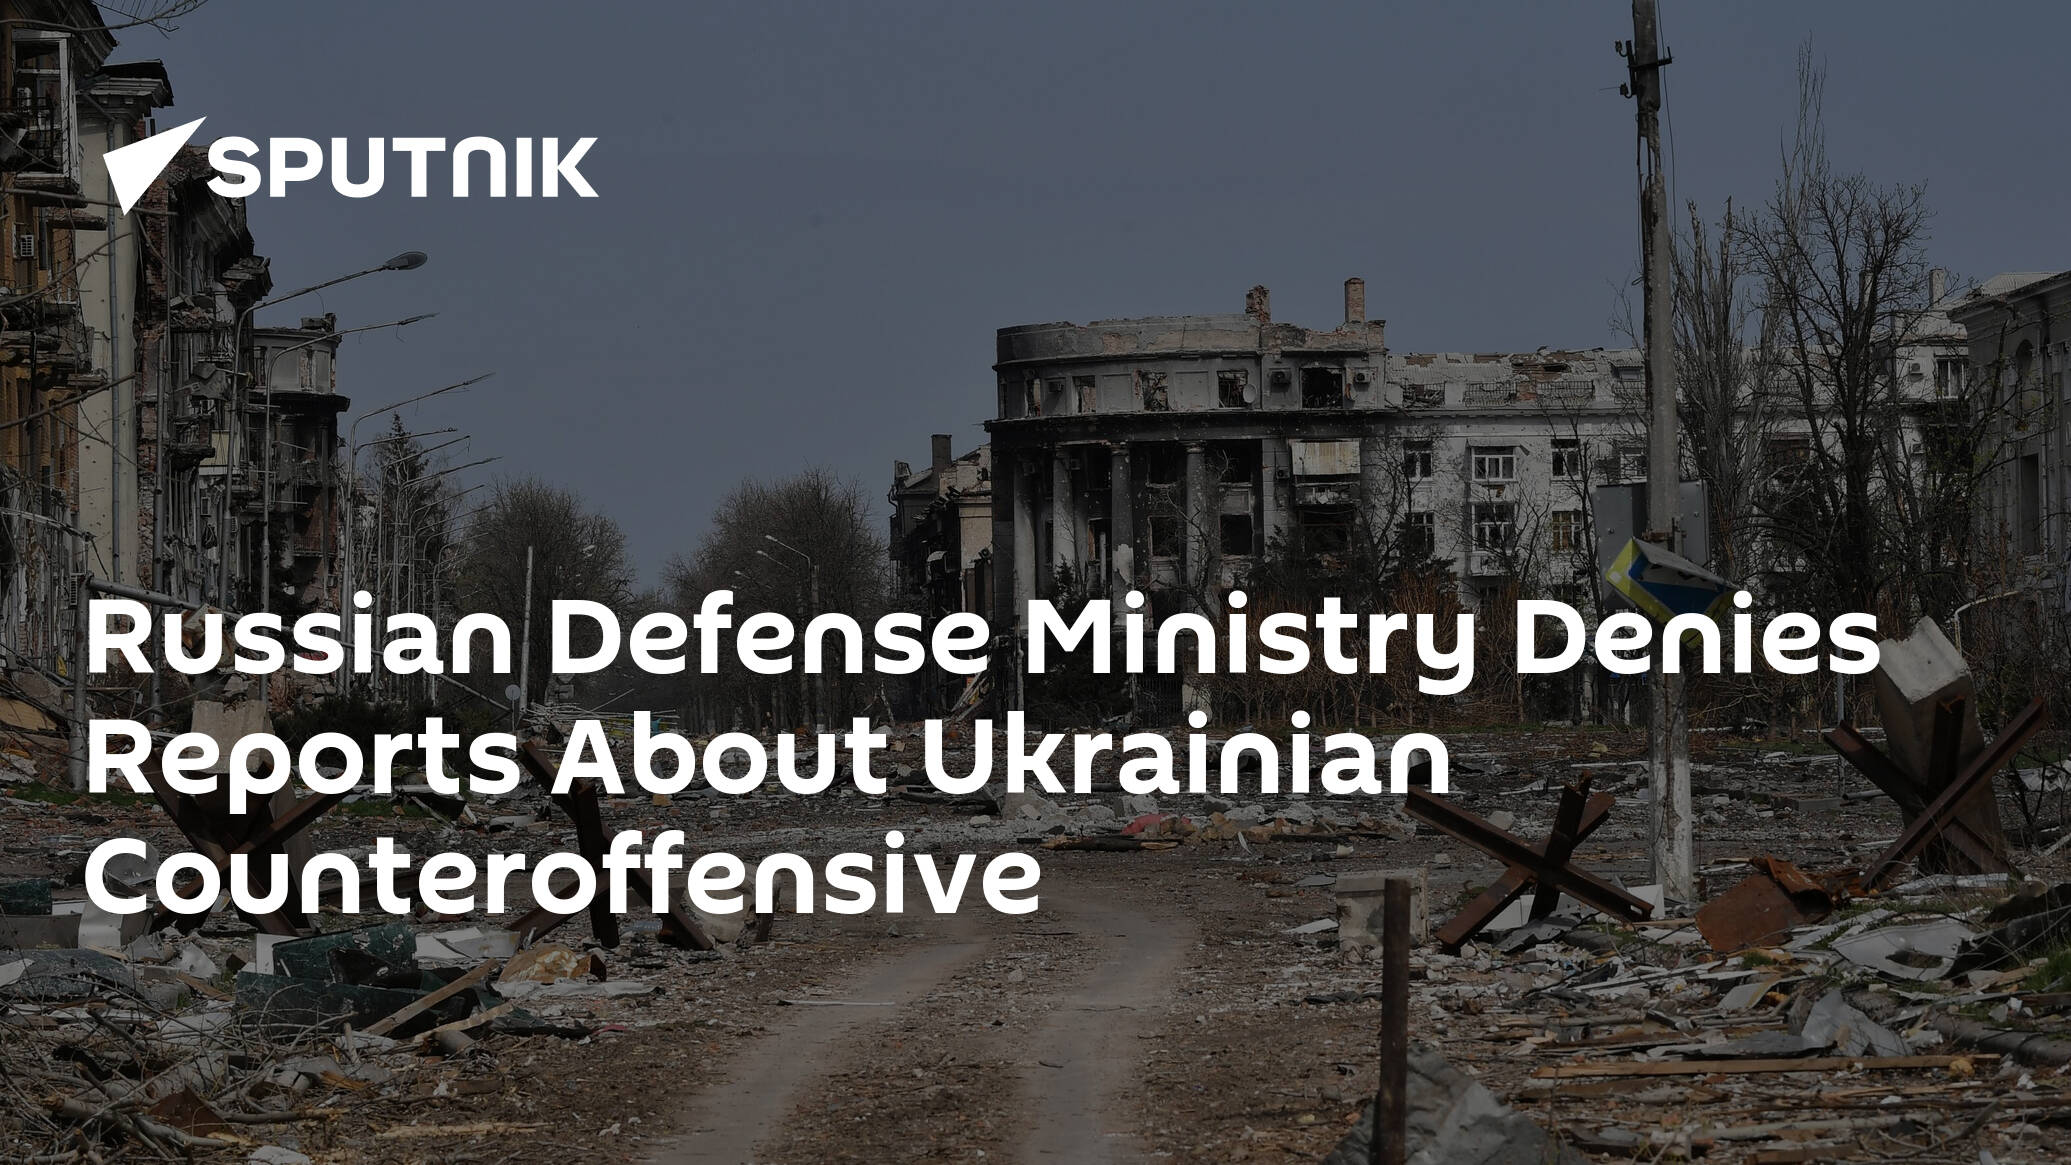 Russian Defense Ministry Denies Reports About Ukrainian Counteroffensive